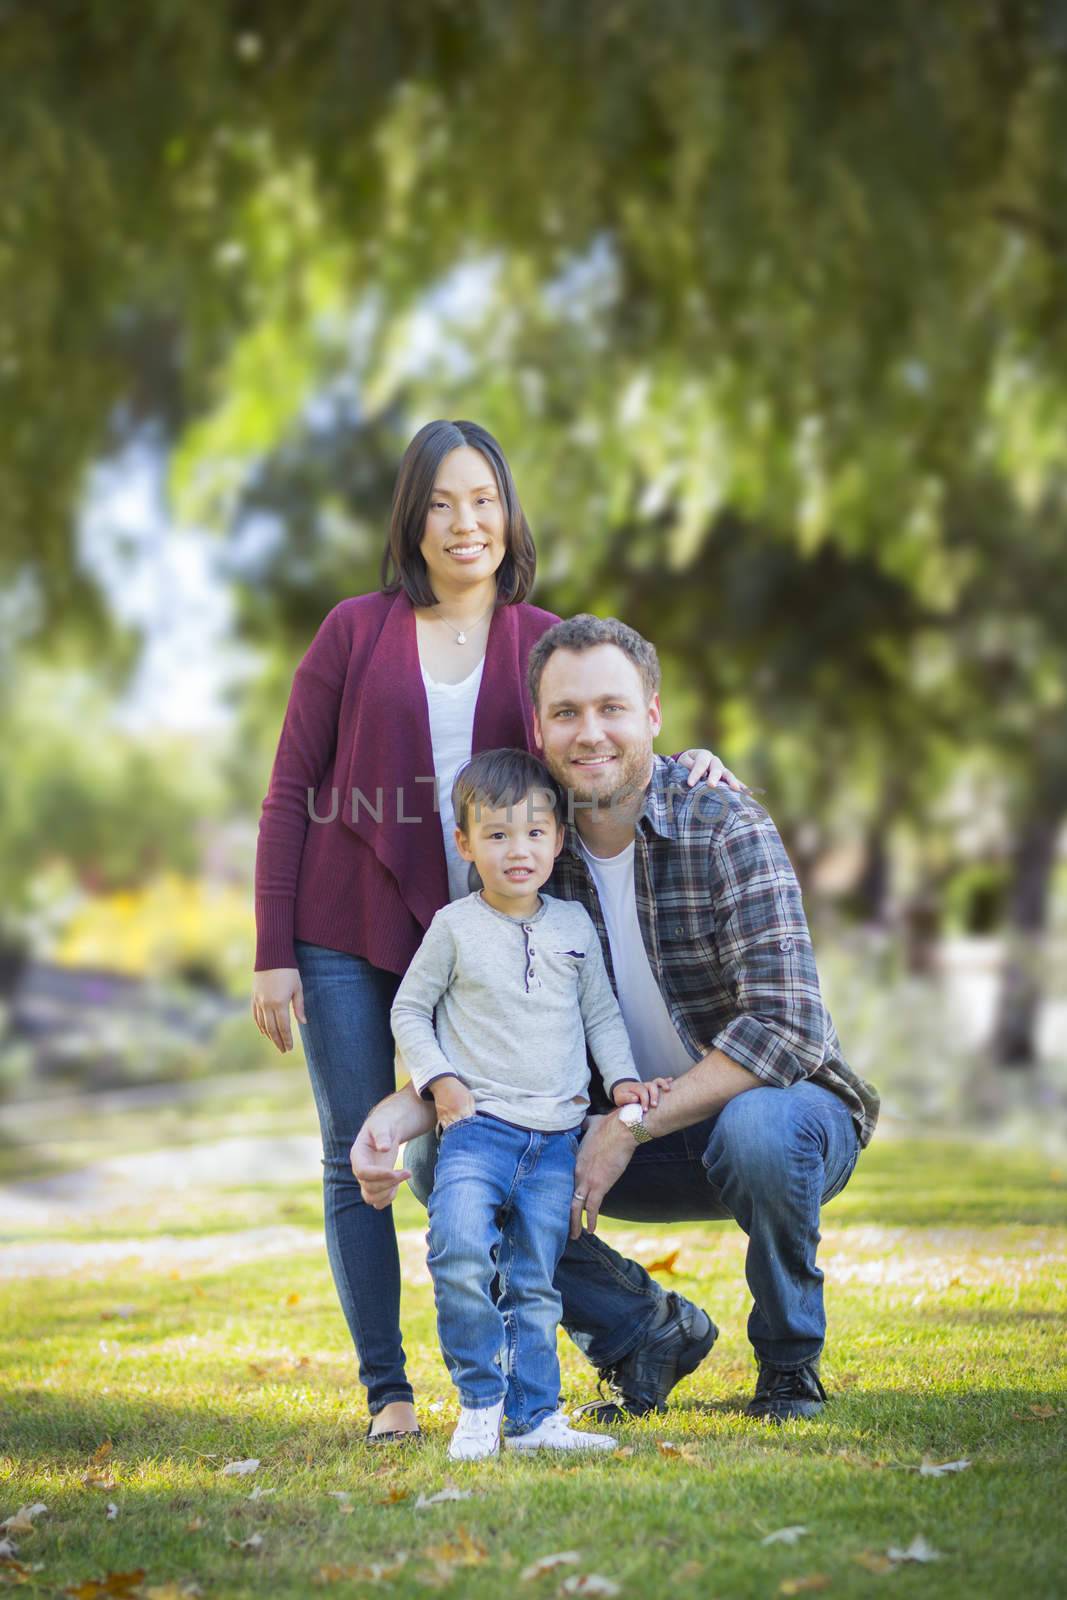 Mixed Race Young Family Portrait Outdoors by Feverpitched